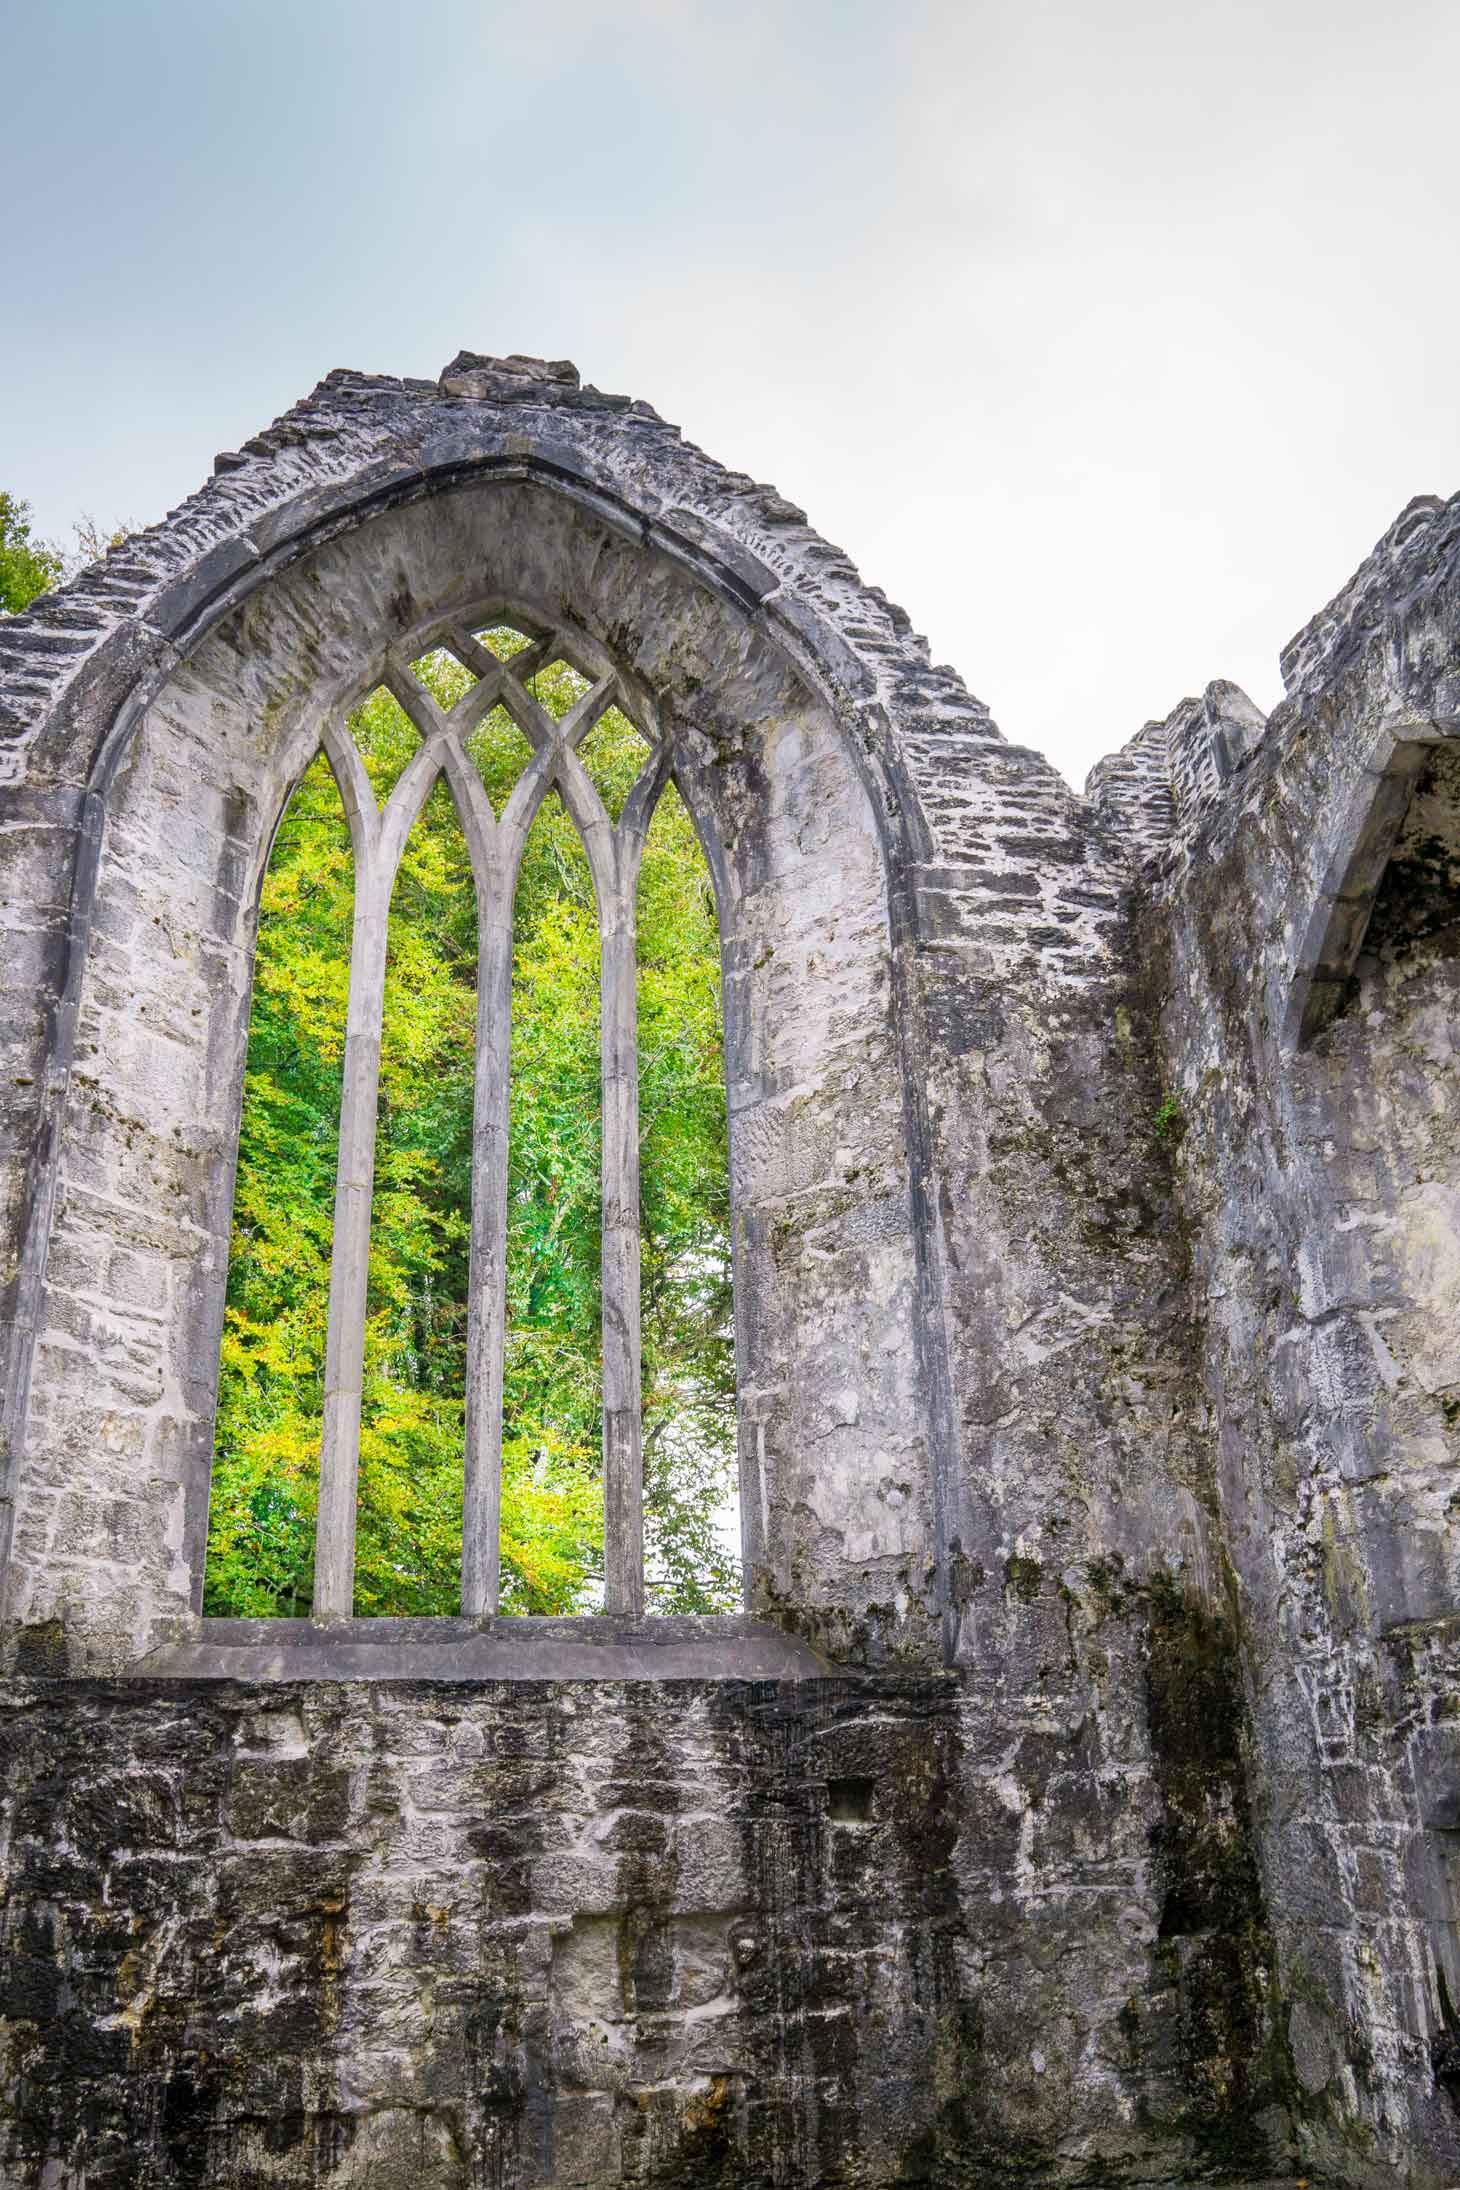 Muckross Abbey ruins are worth viewing. Don't miss the Yew tree inside!